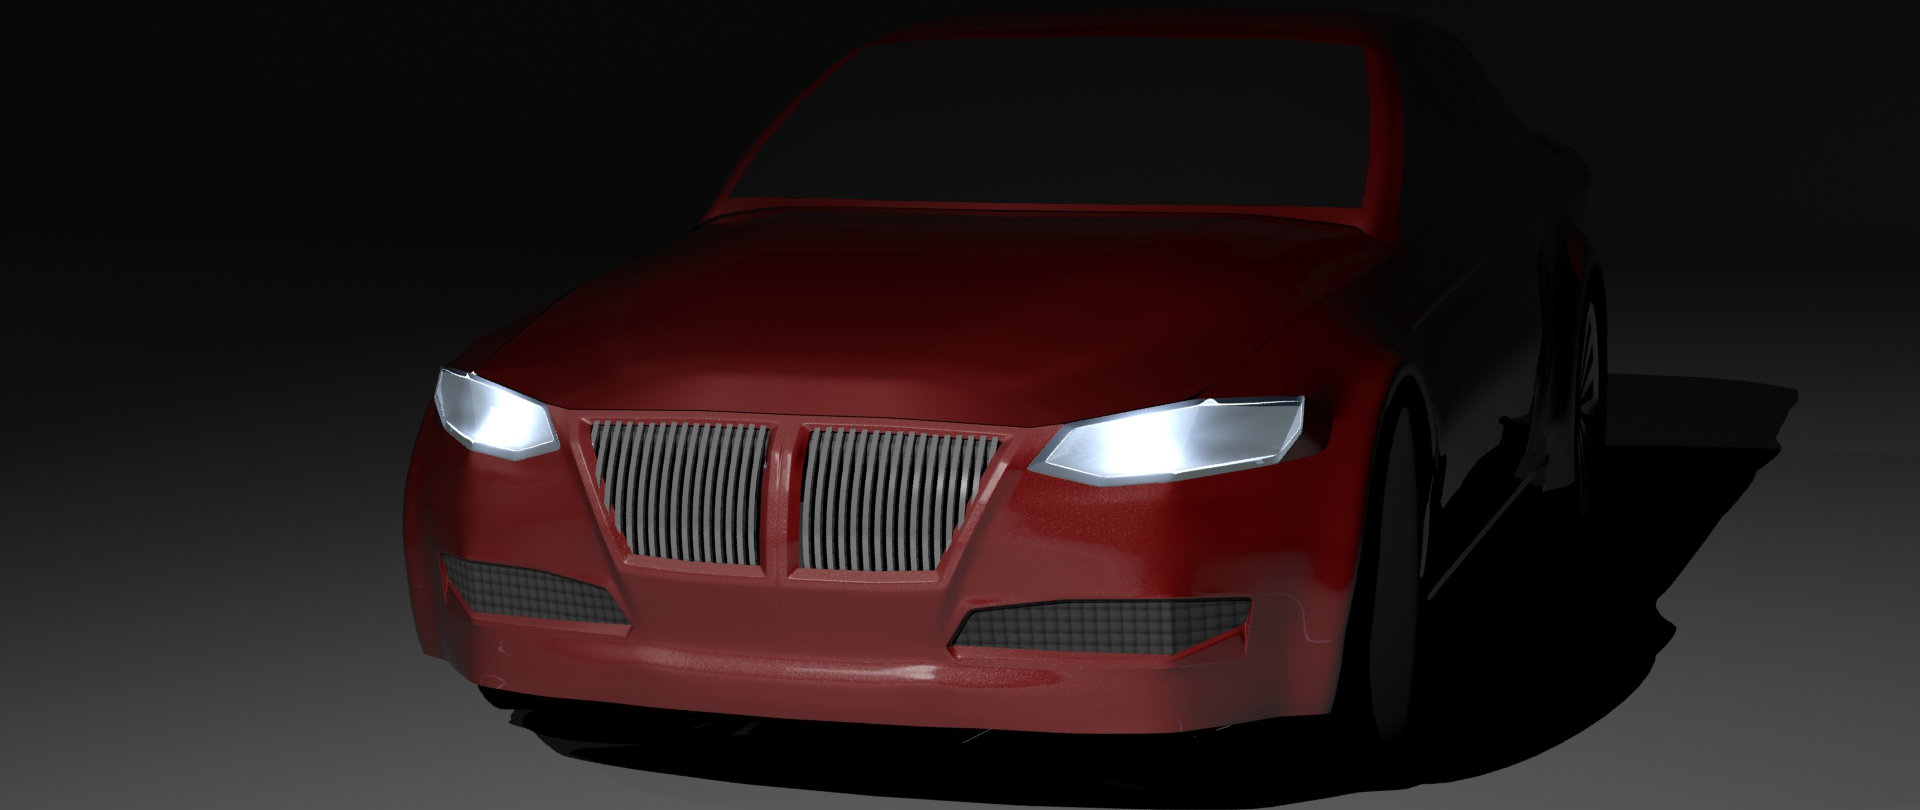 Rendering of a red 'BMW 3er like' Car.